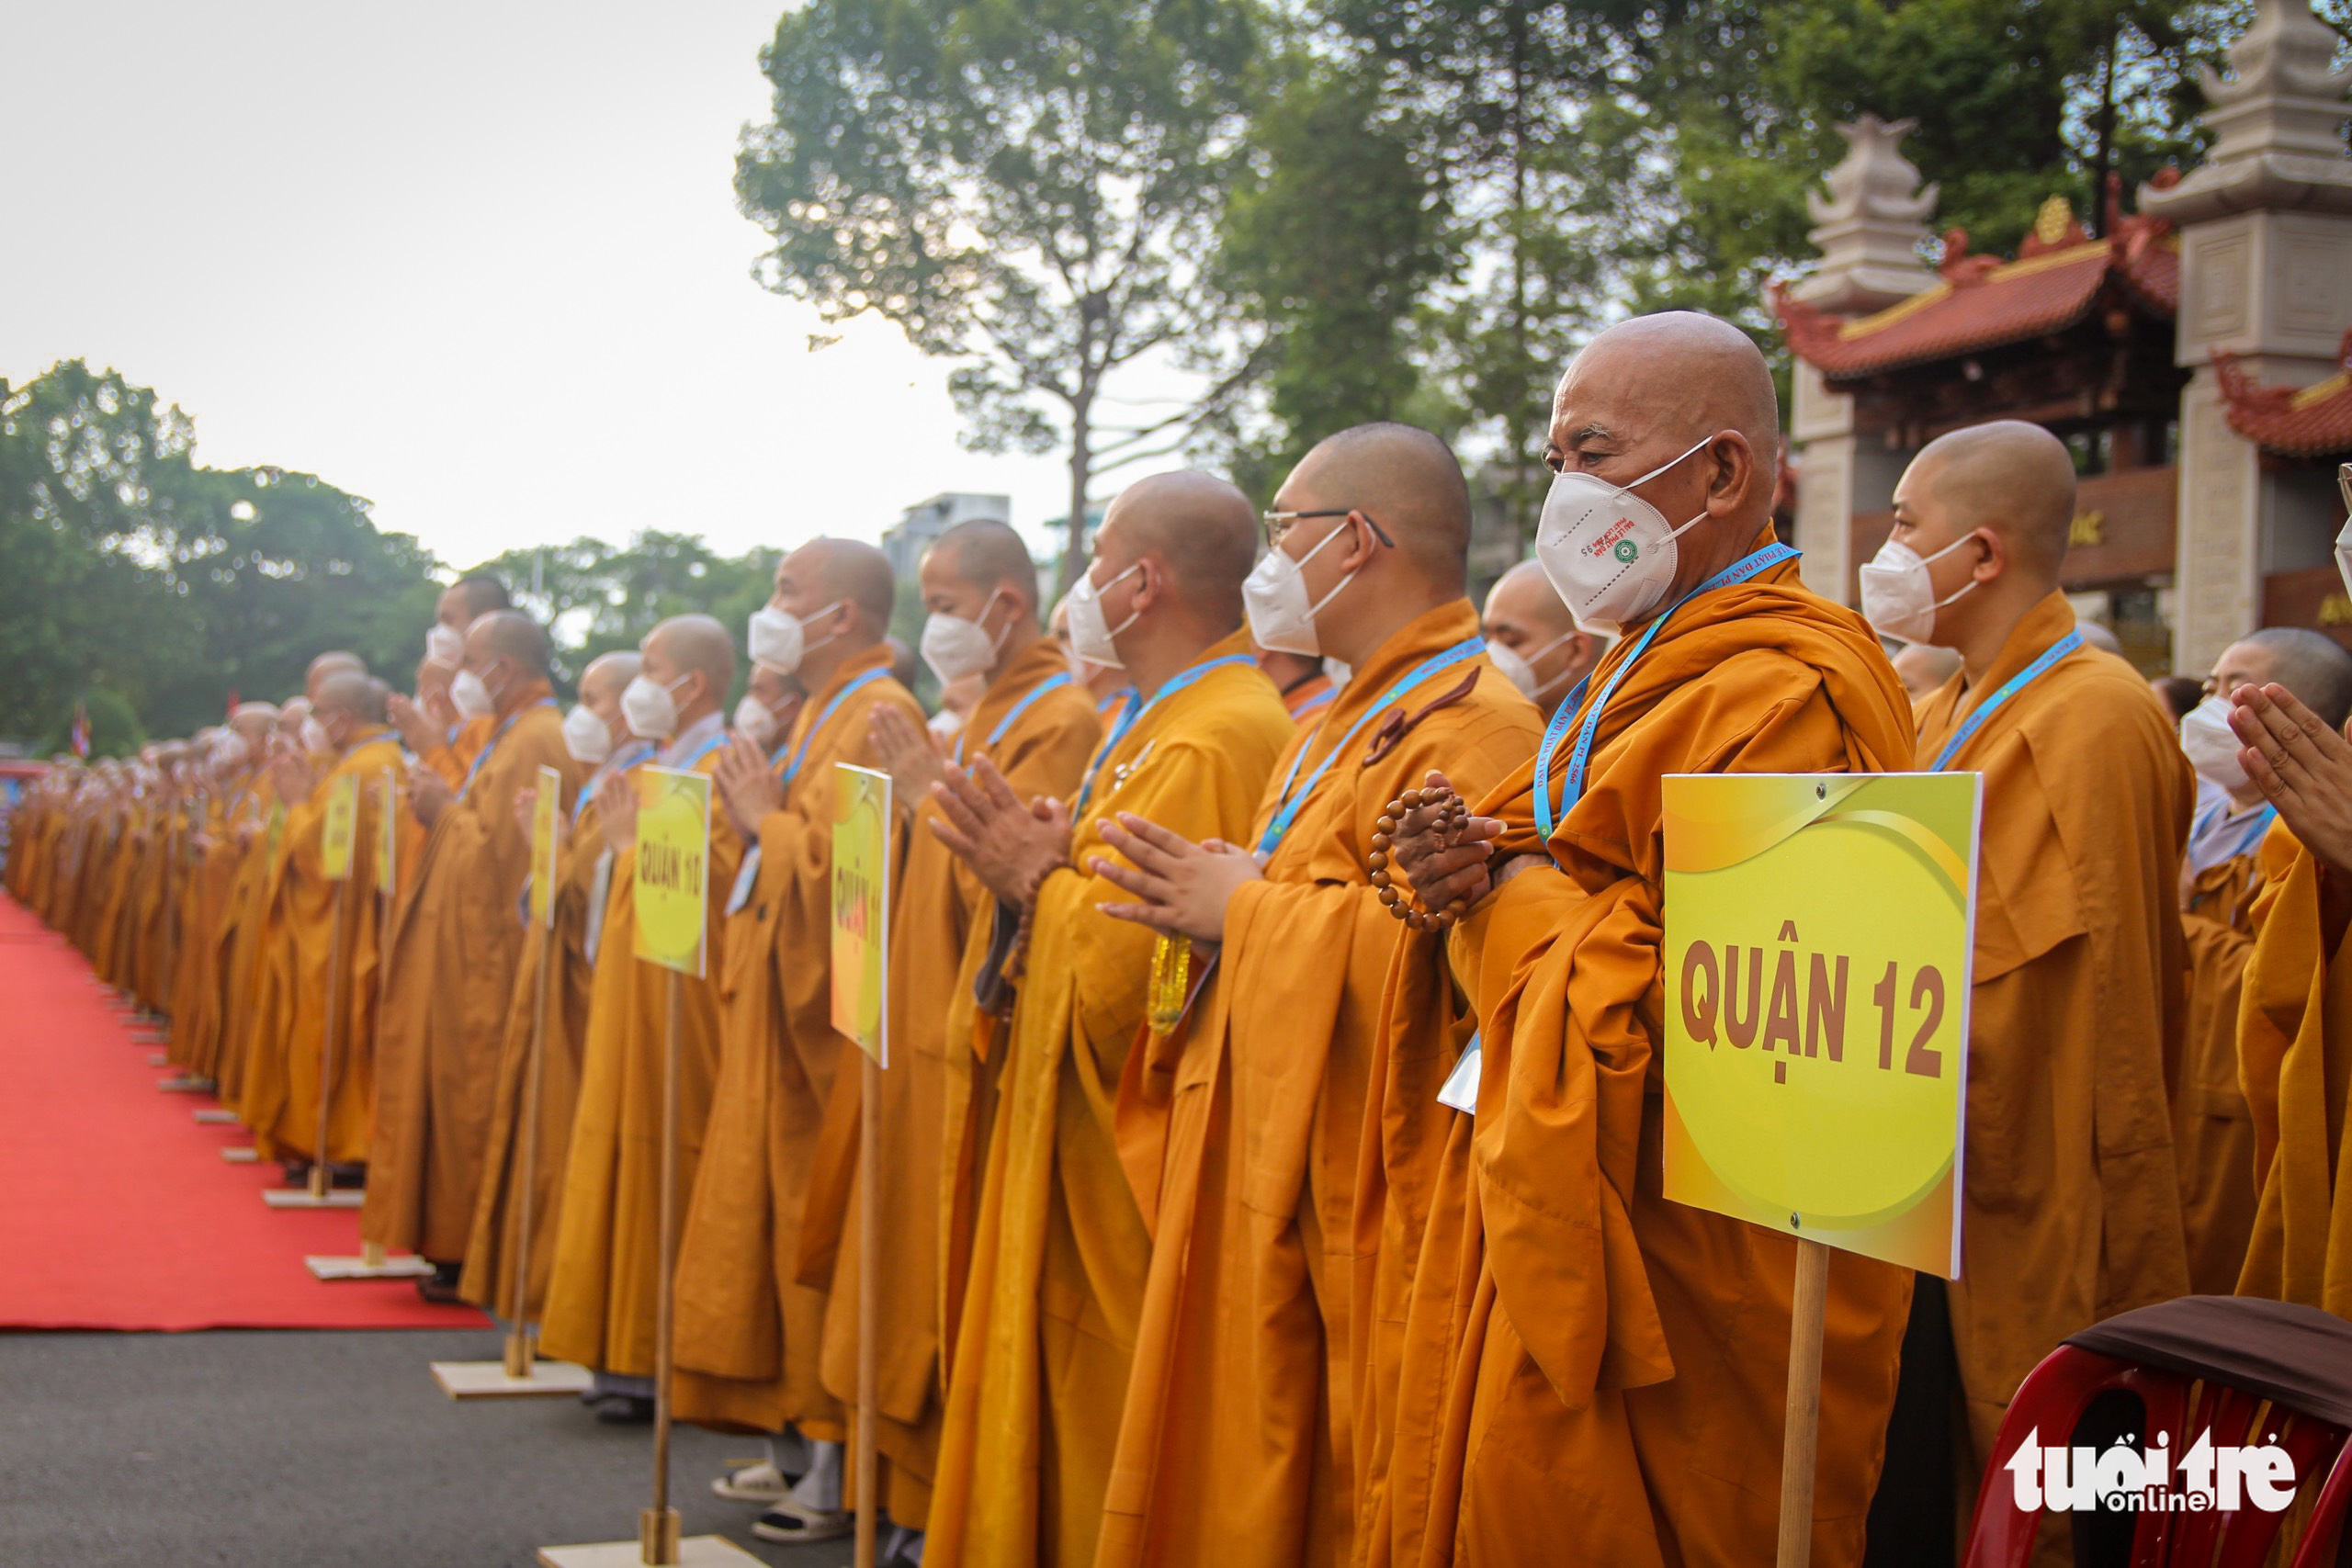 Buddhist monks attend the ceremony marking the 2566th Buddha's Birthday at Vietnam Quoc Tu Pagoda in District 10, Ho Chi Minh City, May 15, 2022. Photo: Phuong Quyen / Tuoi Tre